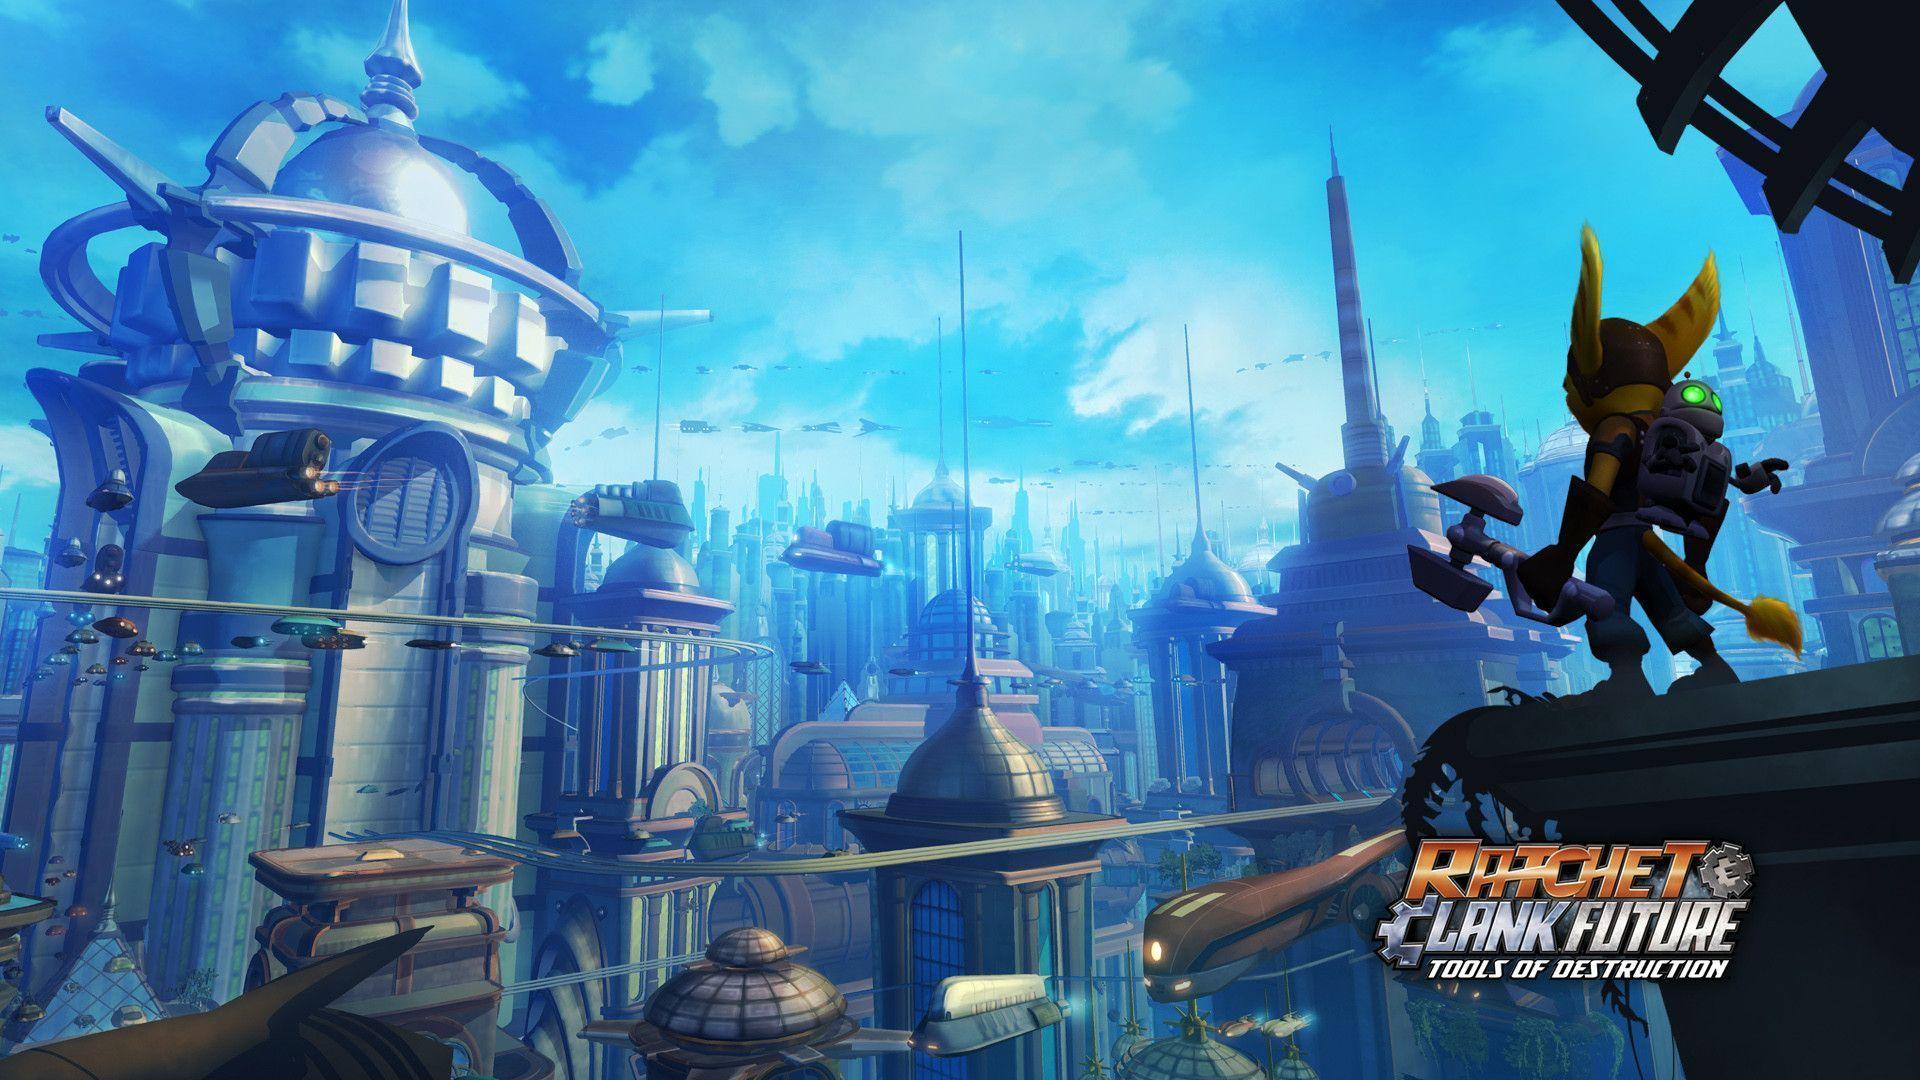 Wallpaper from Ratchet & Clank Future, Tools of Destruction